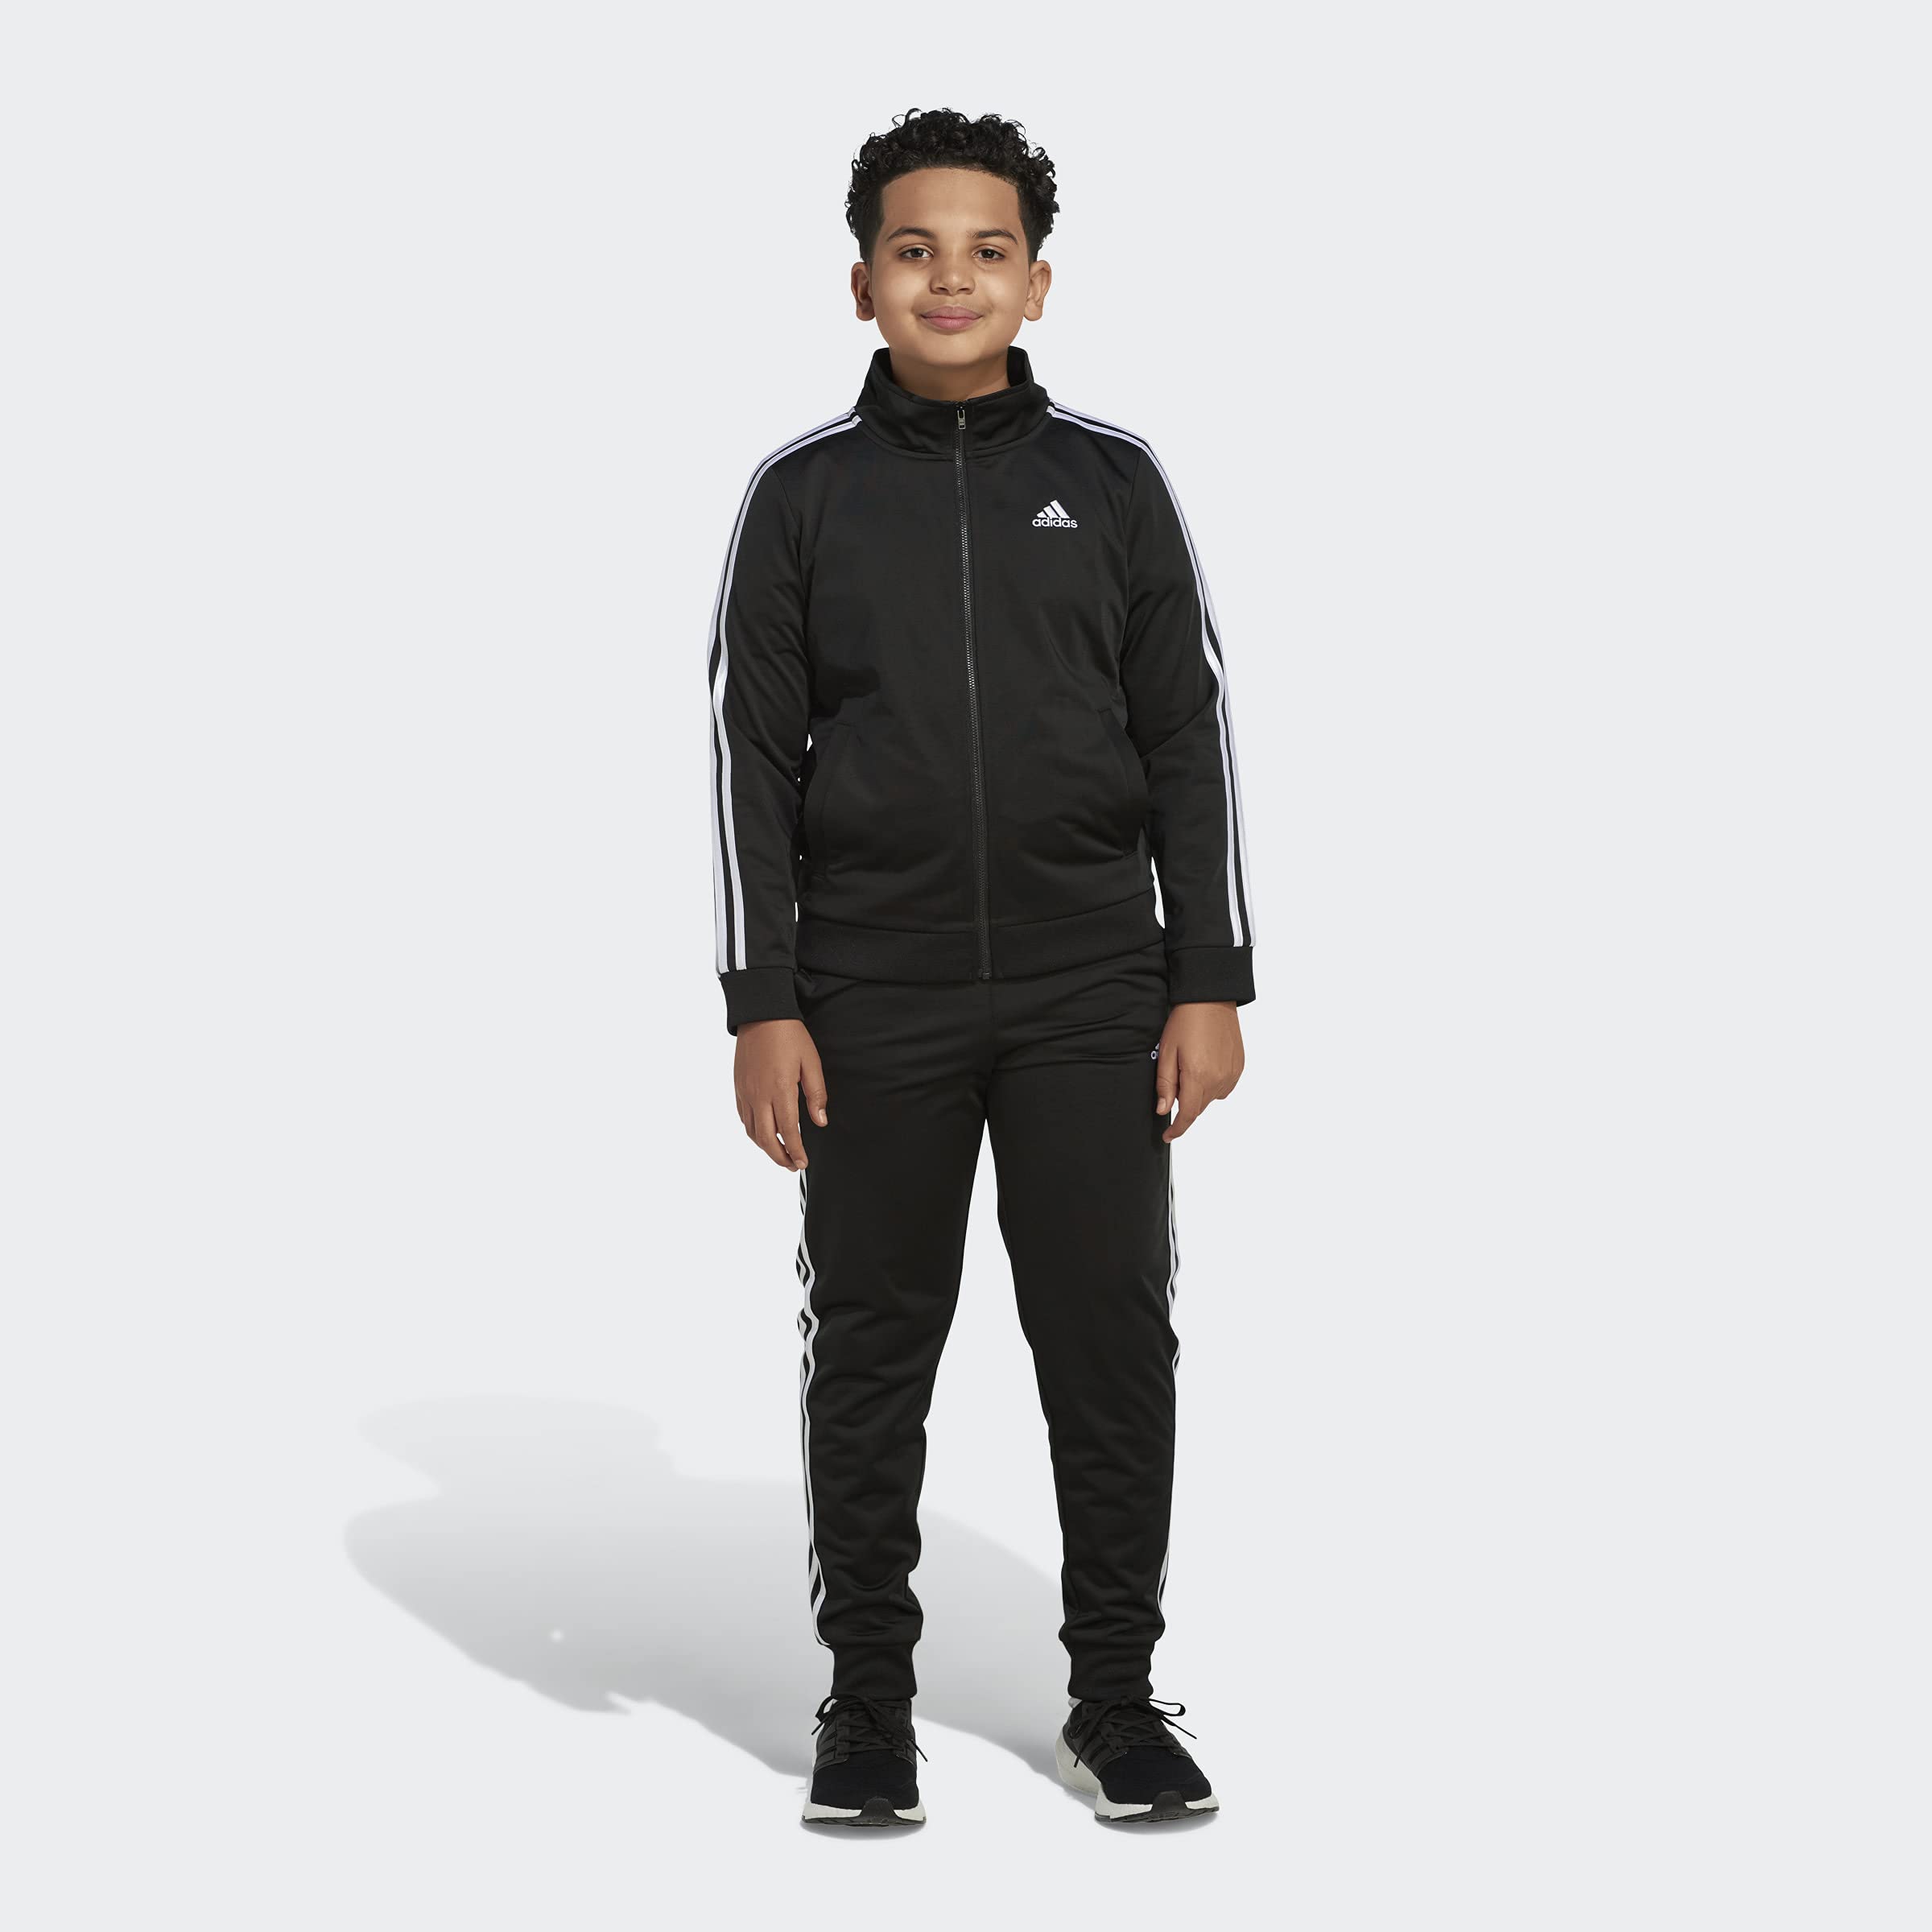 adidas Boy's Zip Front Iconic Tricot Jacket